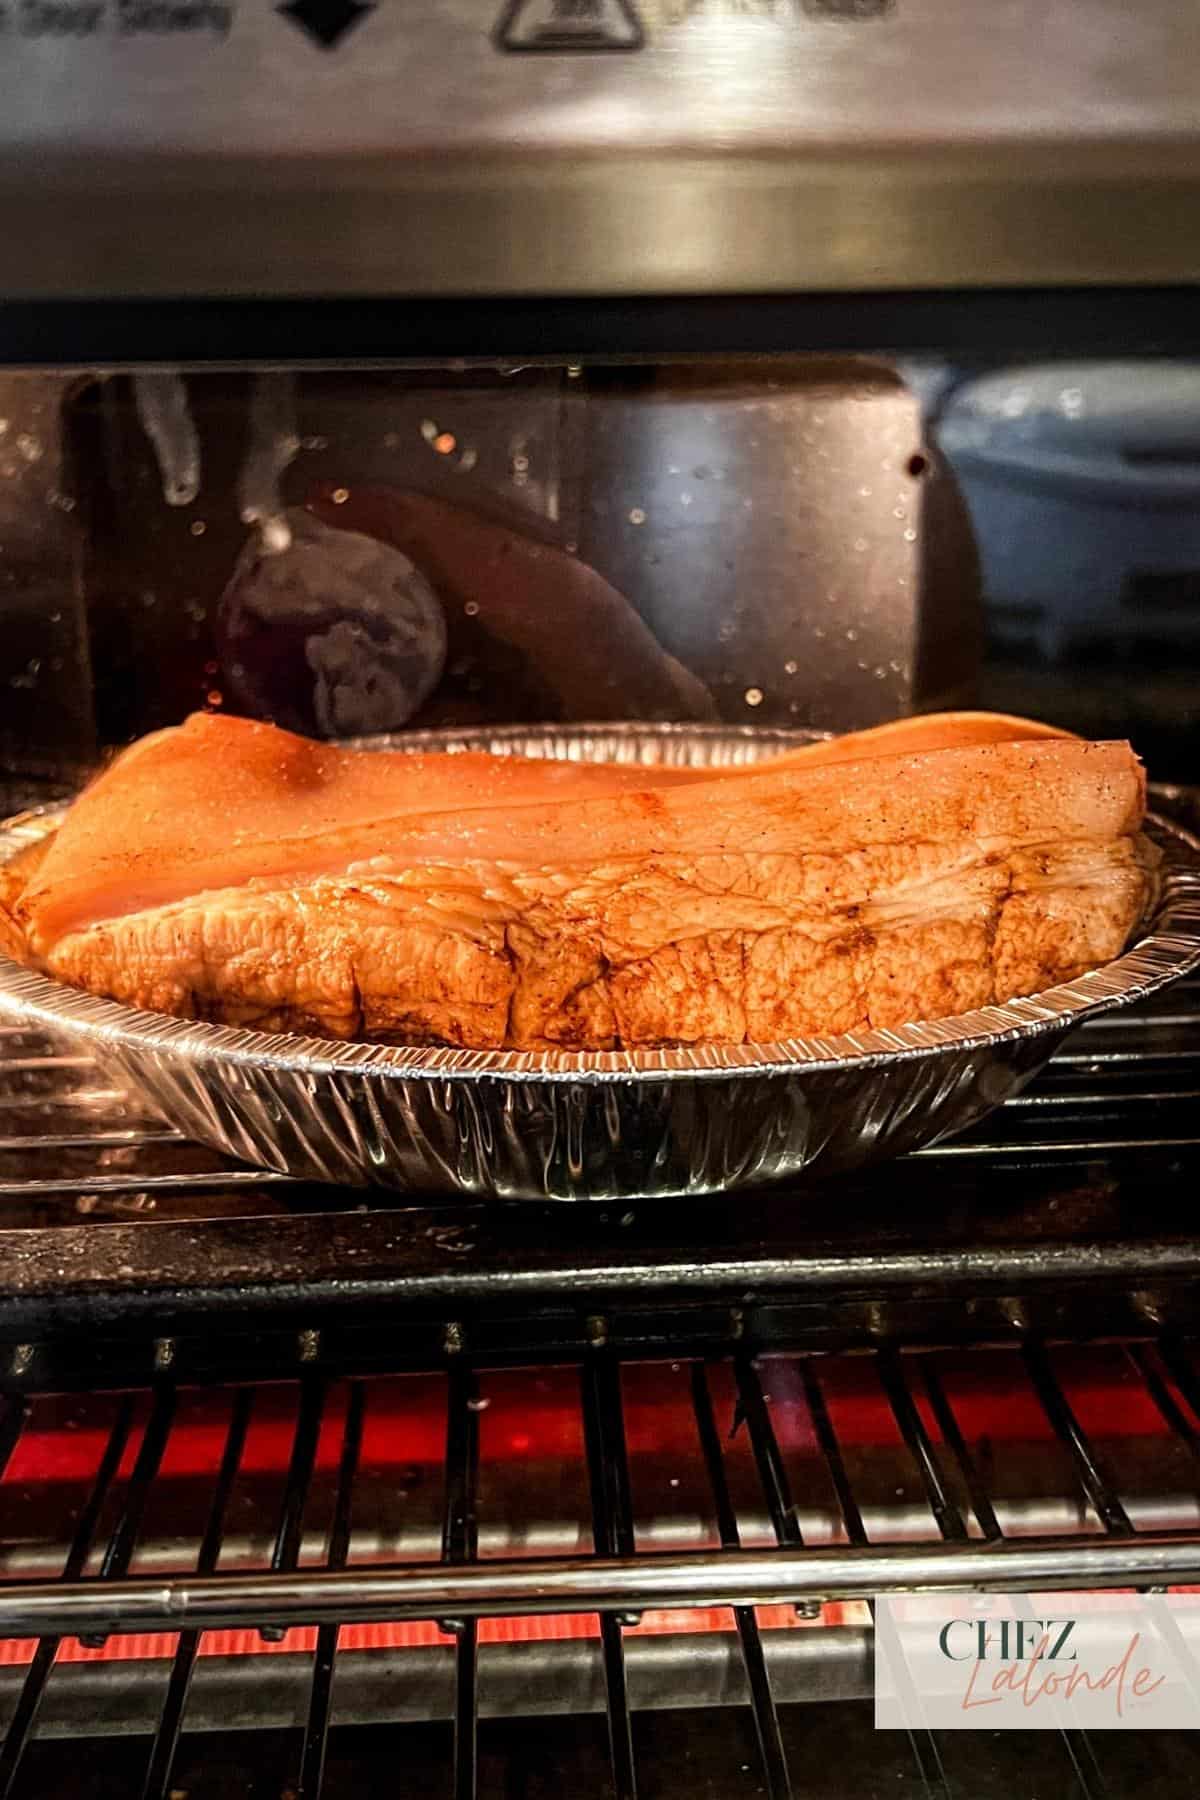 Pork belly being cooked inside the toaster oven.